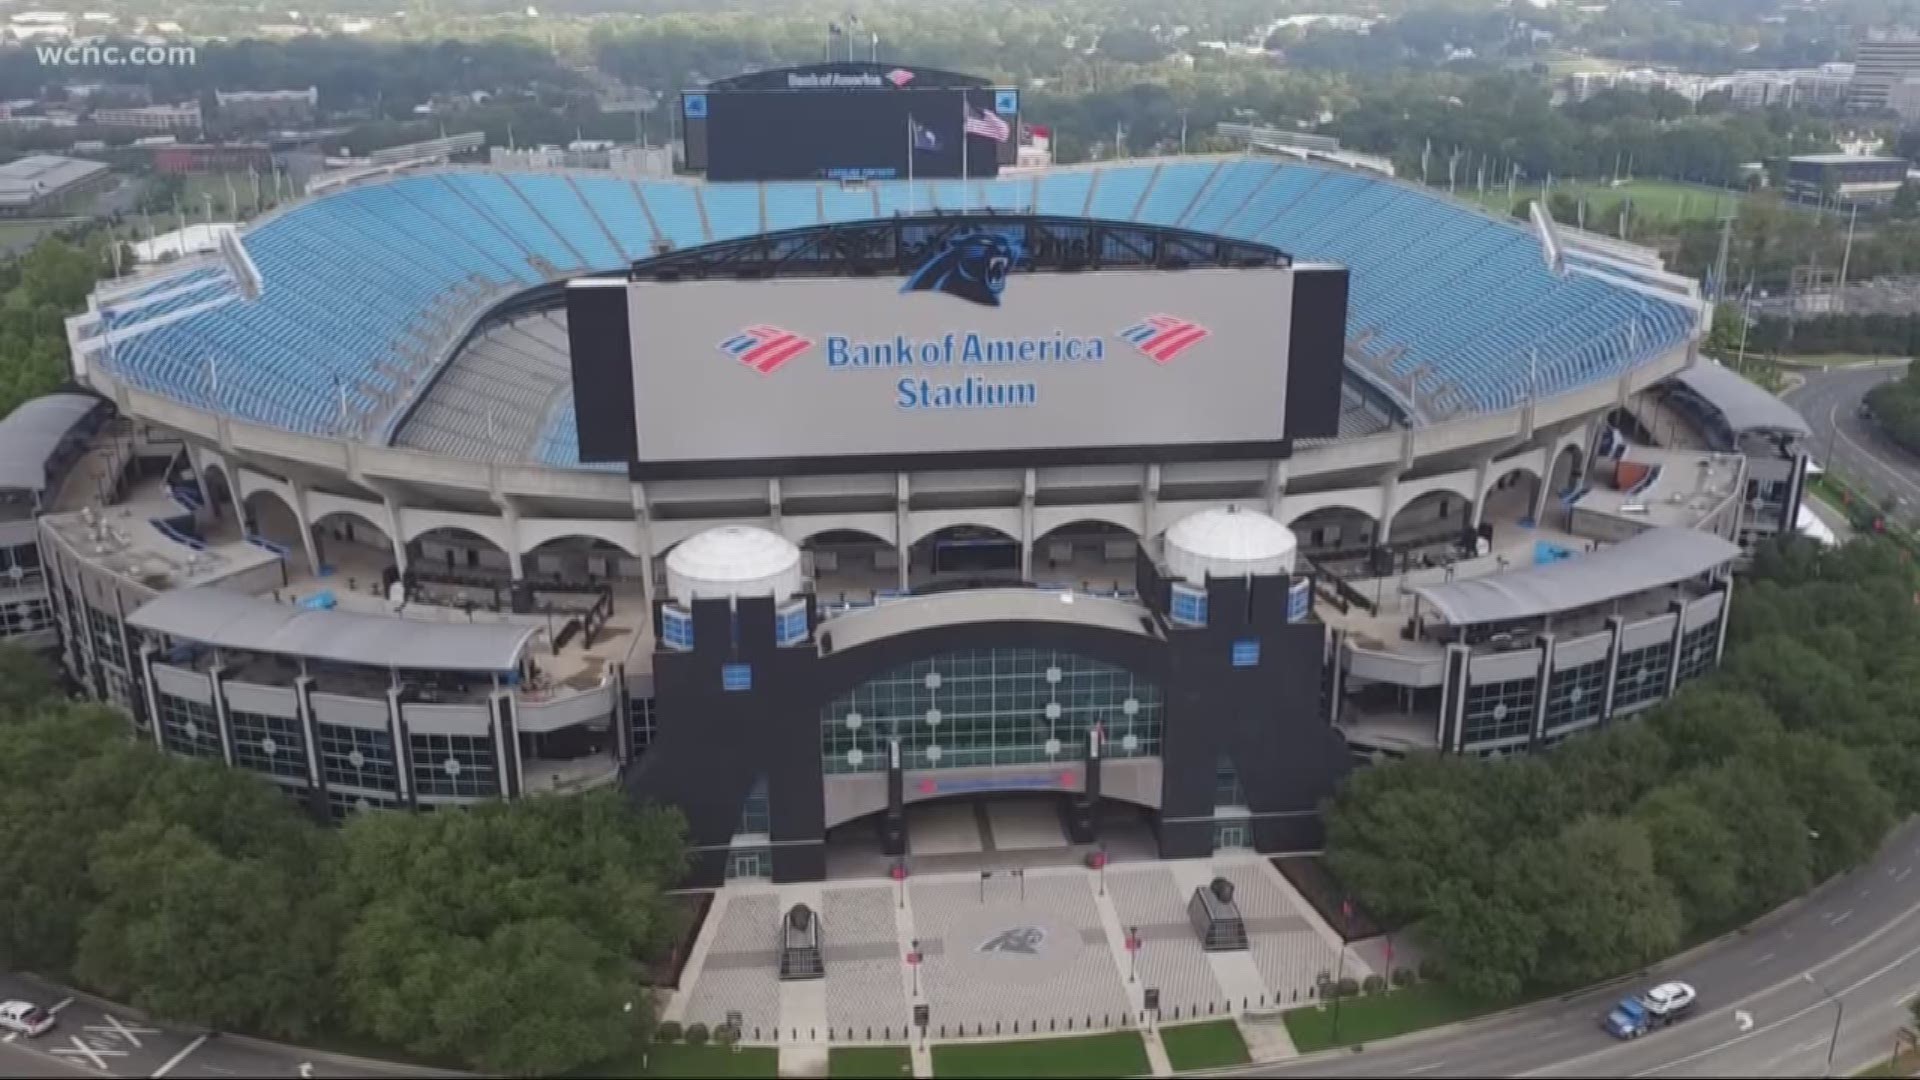 Panthers owner David Tepper has big plans for the future of Bank of America Stadium. He's considering adding a retractable roof to the current stadium or just building a new one altogether.